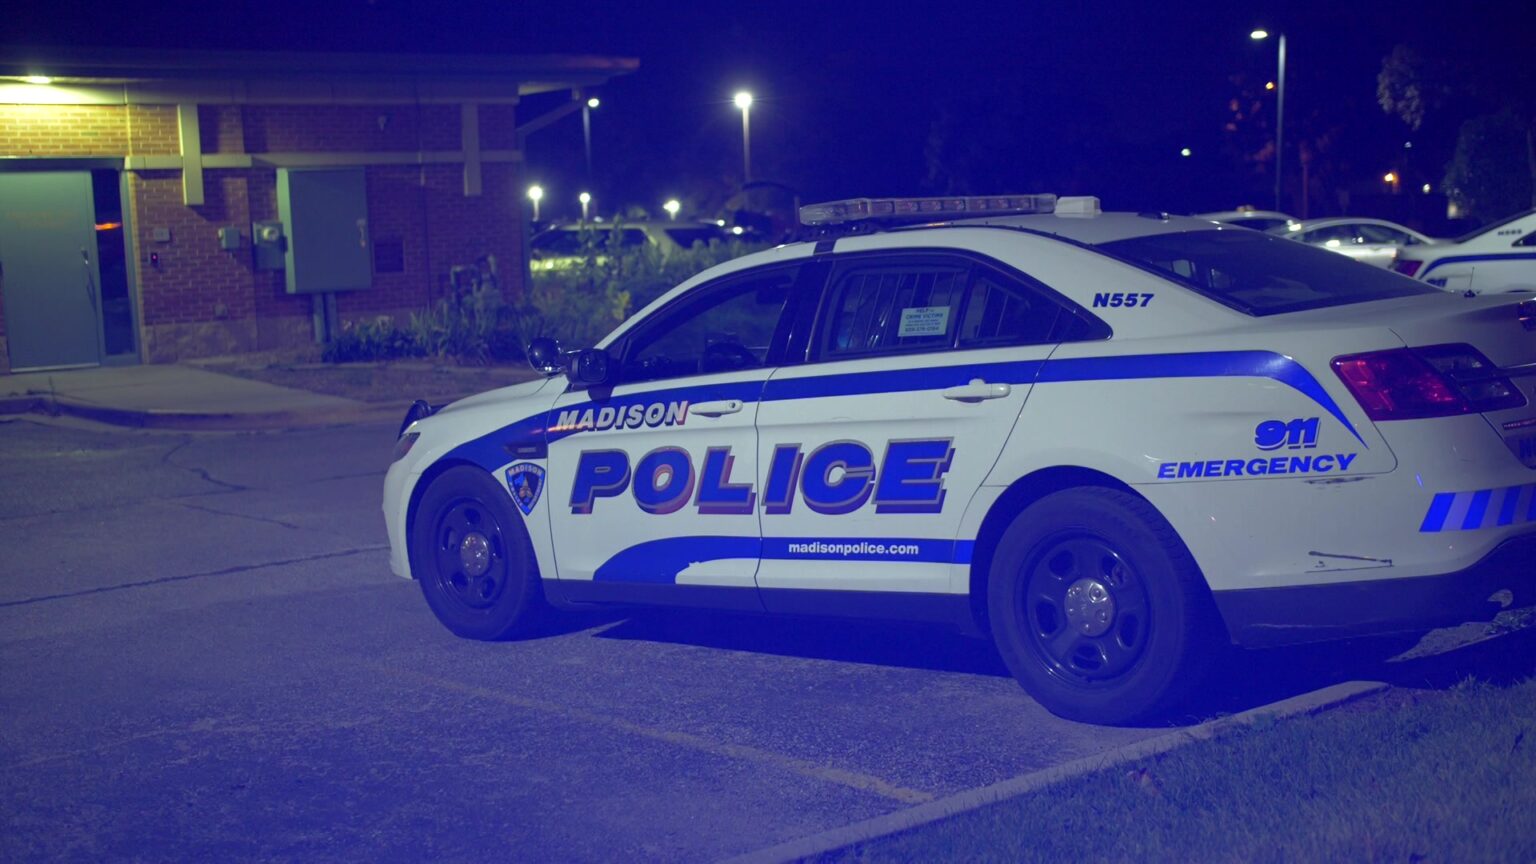 A Madison Police Department cruiser sits in a parking lot with a building and other parked cars in the background, with a blue tint to the image due to a flashing light.